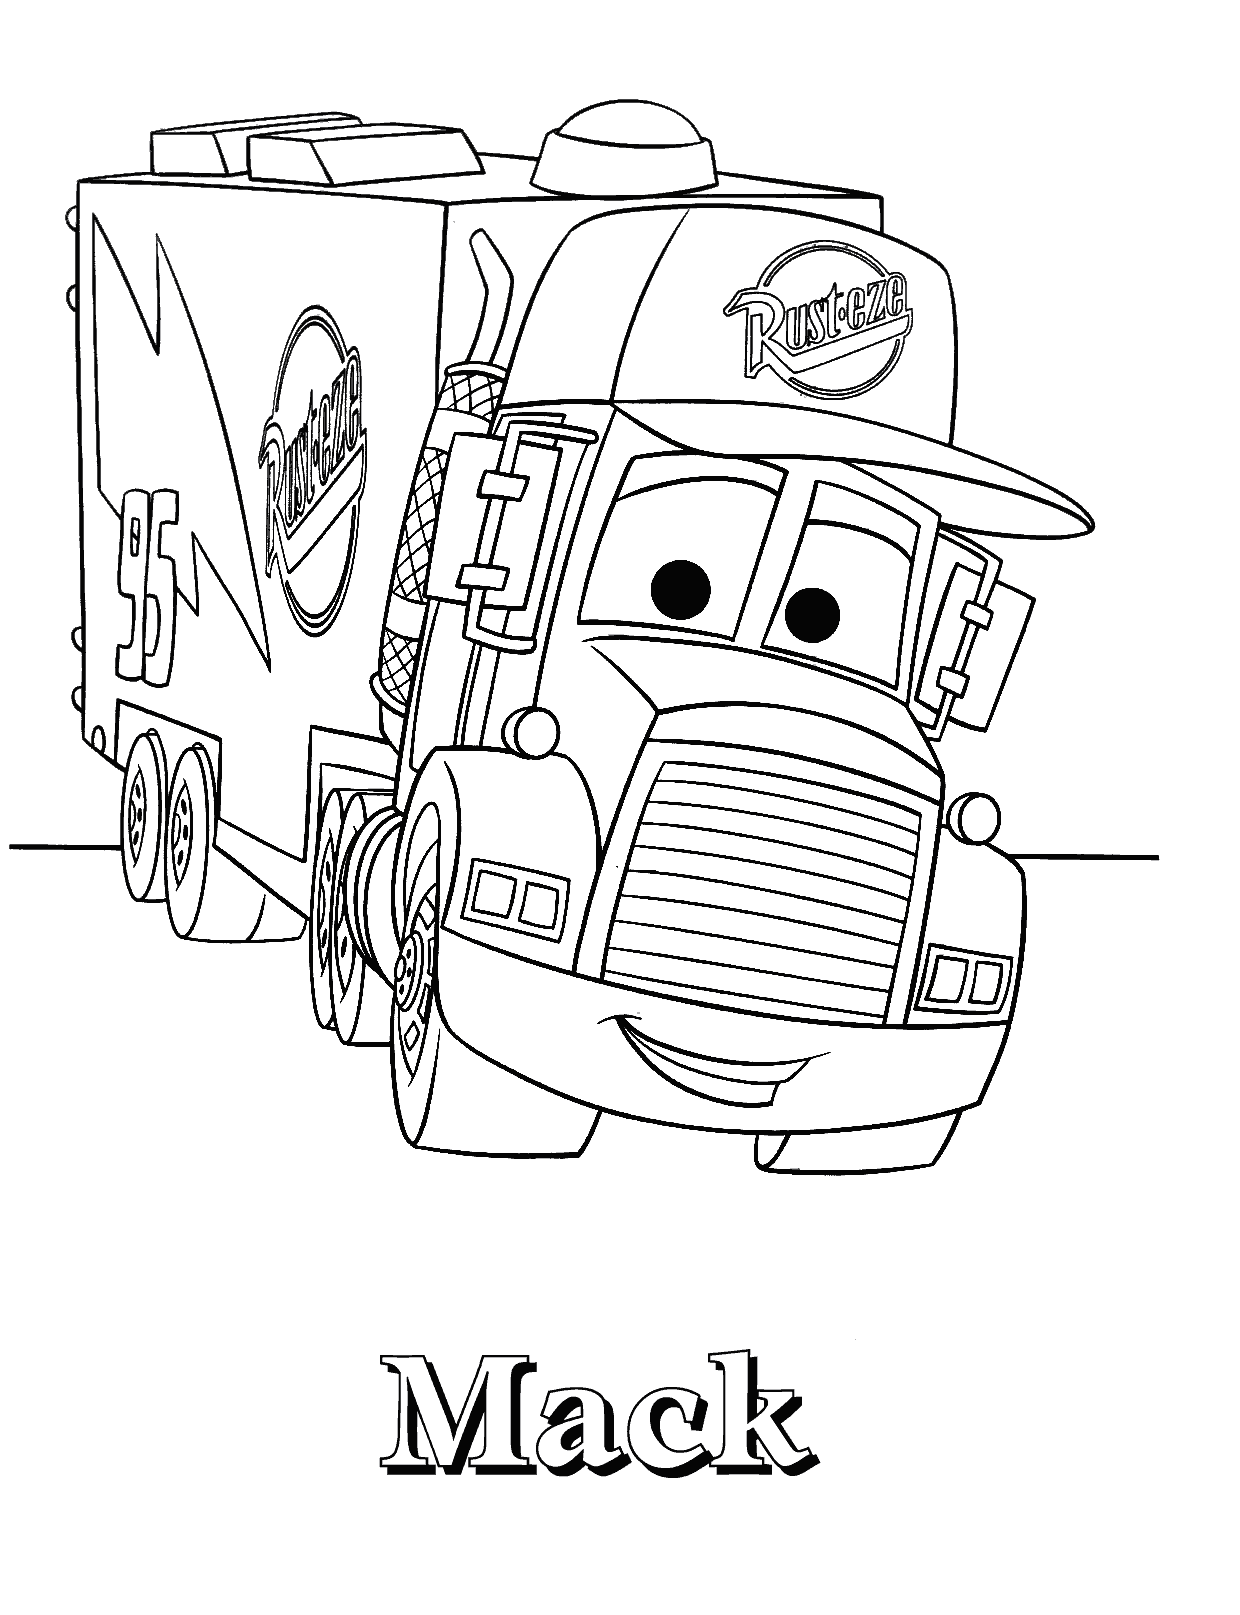 Lightning mcqueen coloring pages to download and print for ...